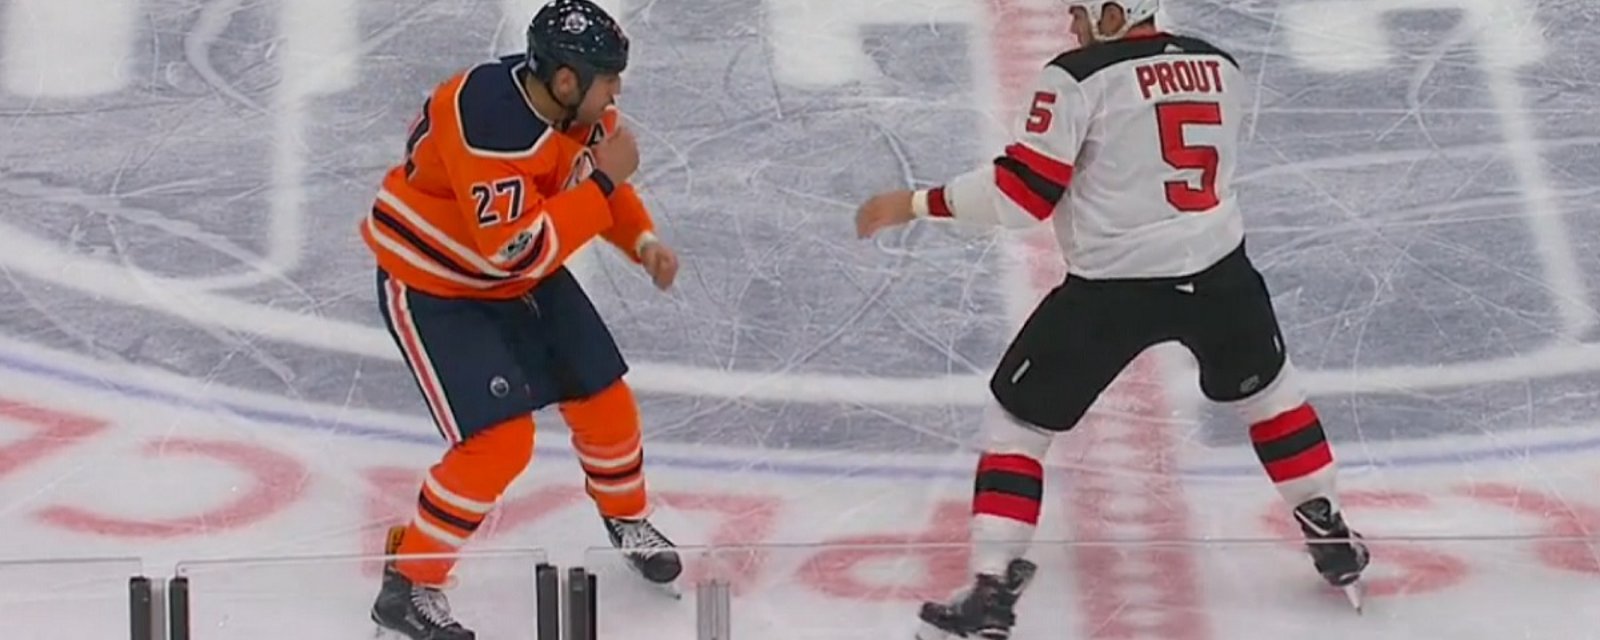 Lucic and Prout drop the gloves in heavyweight fight 